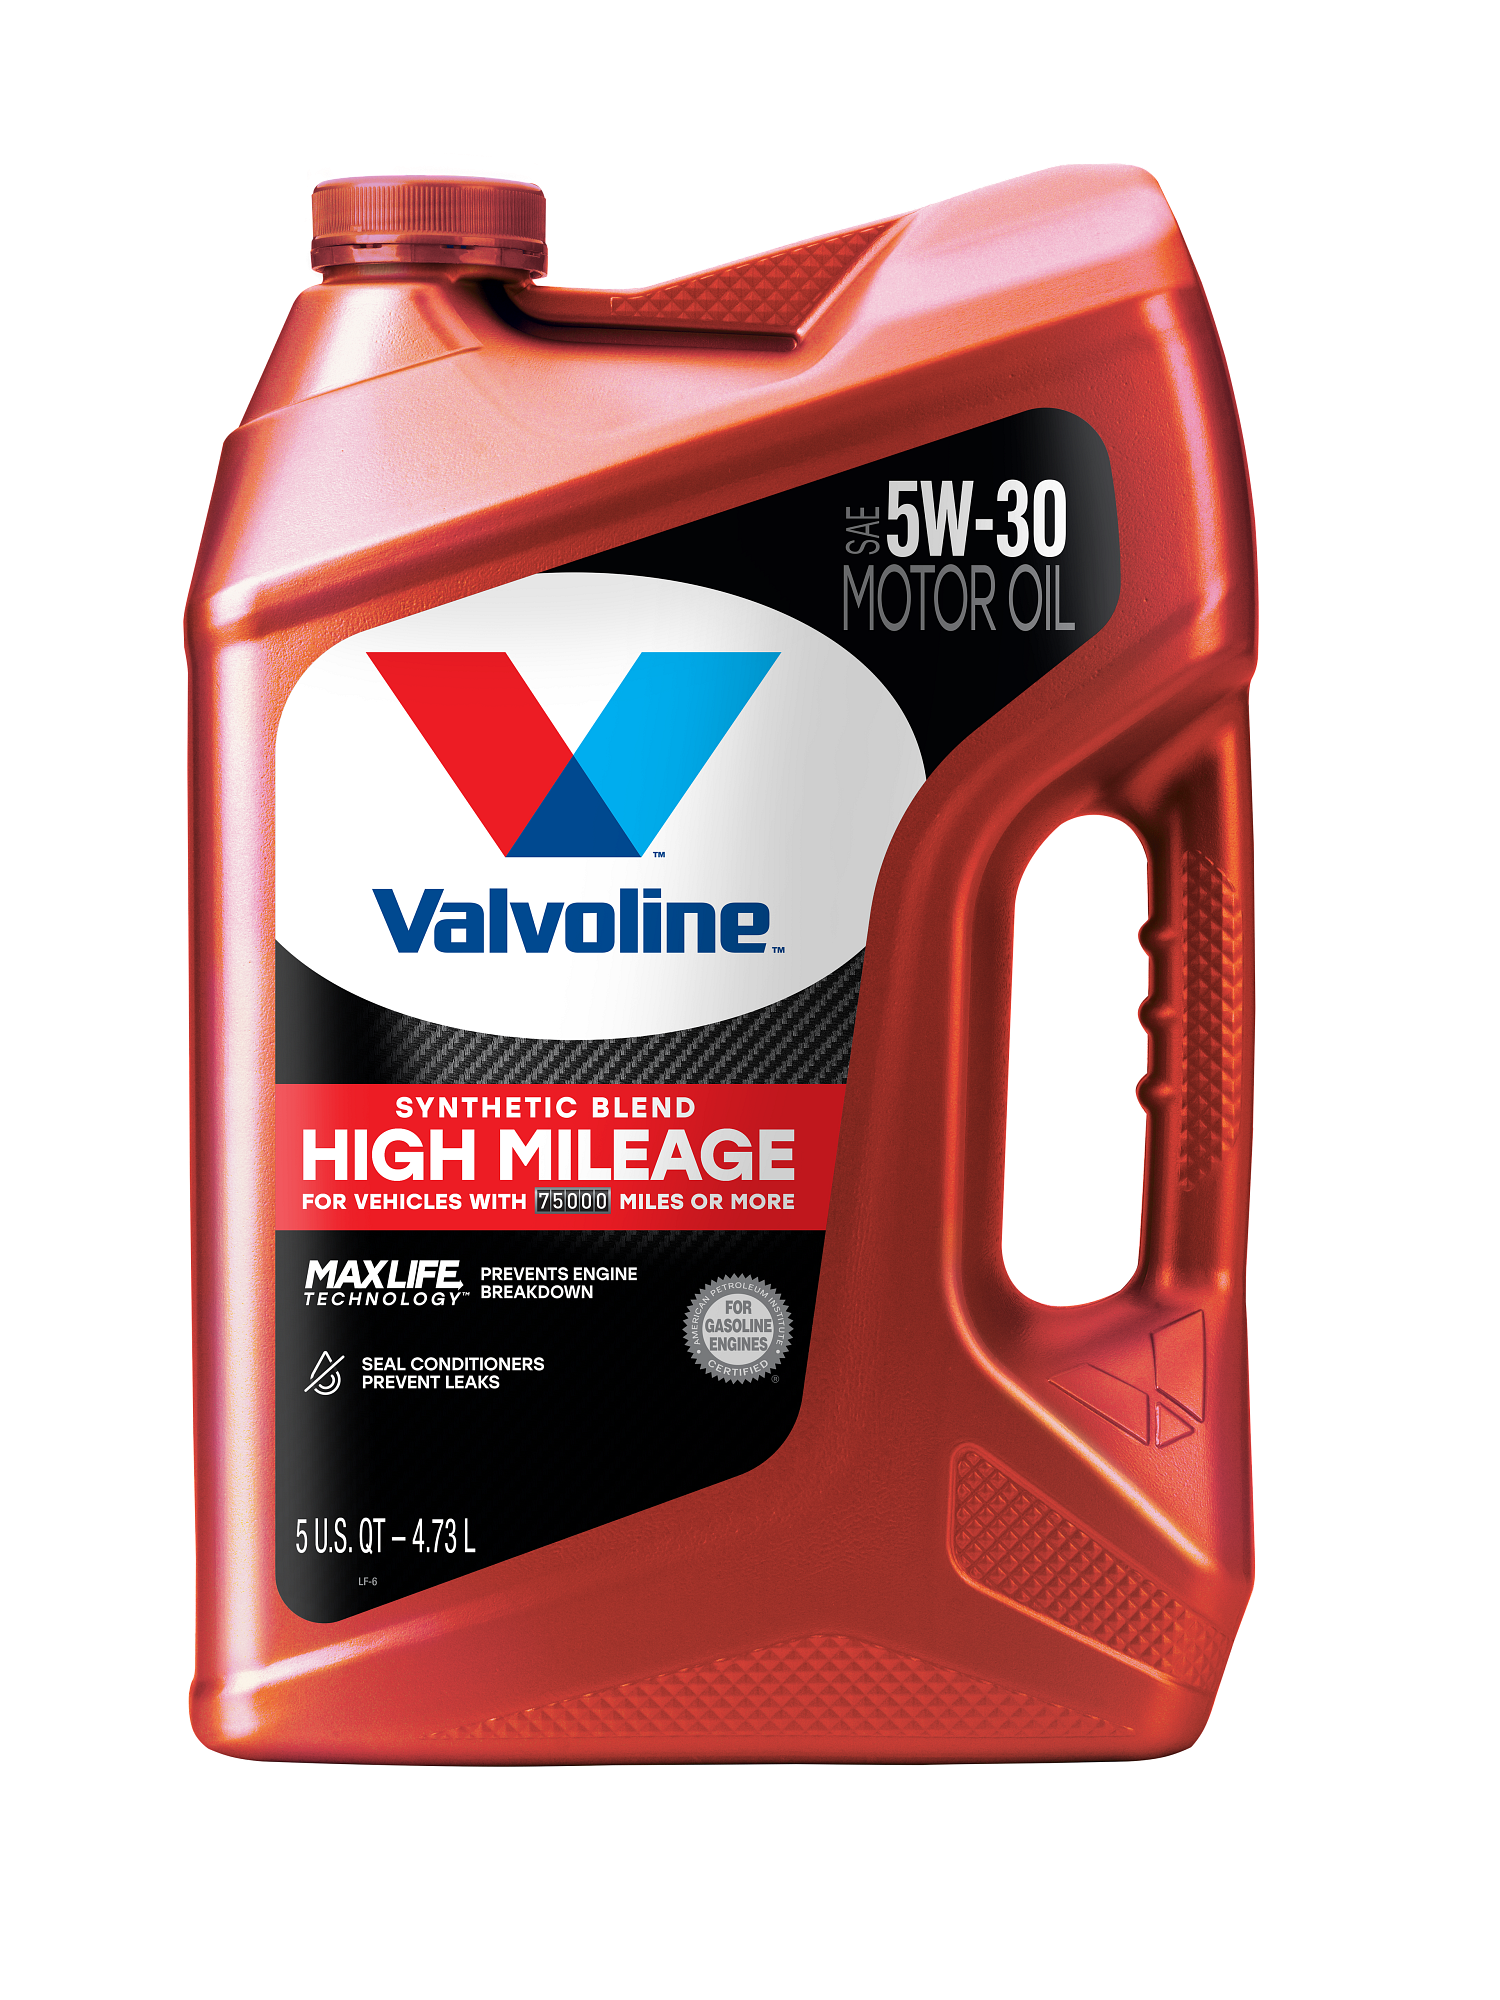 Valvoline High Mileage with MaxLife Technology SAE 5W-30 Synthetic Blend Motor Oil 5 QT - image 3 of 8